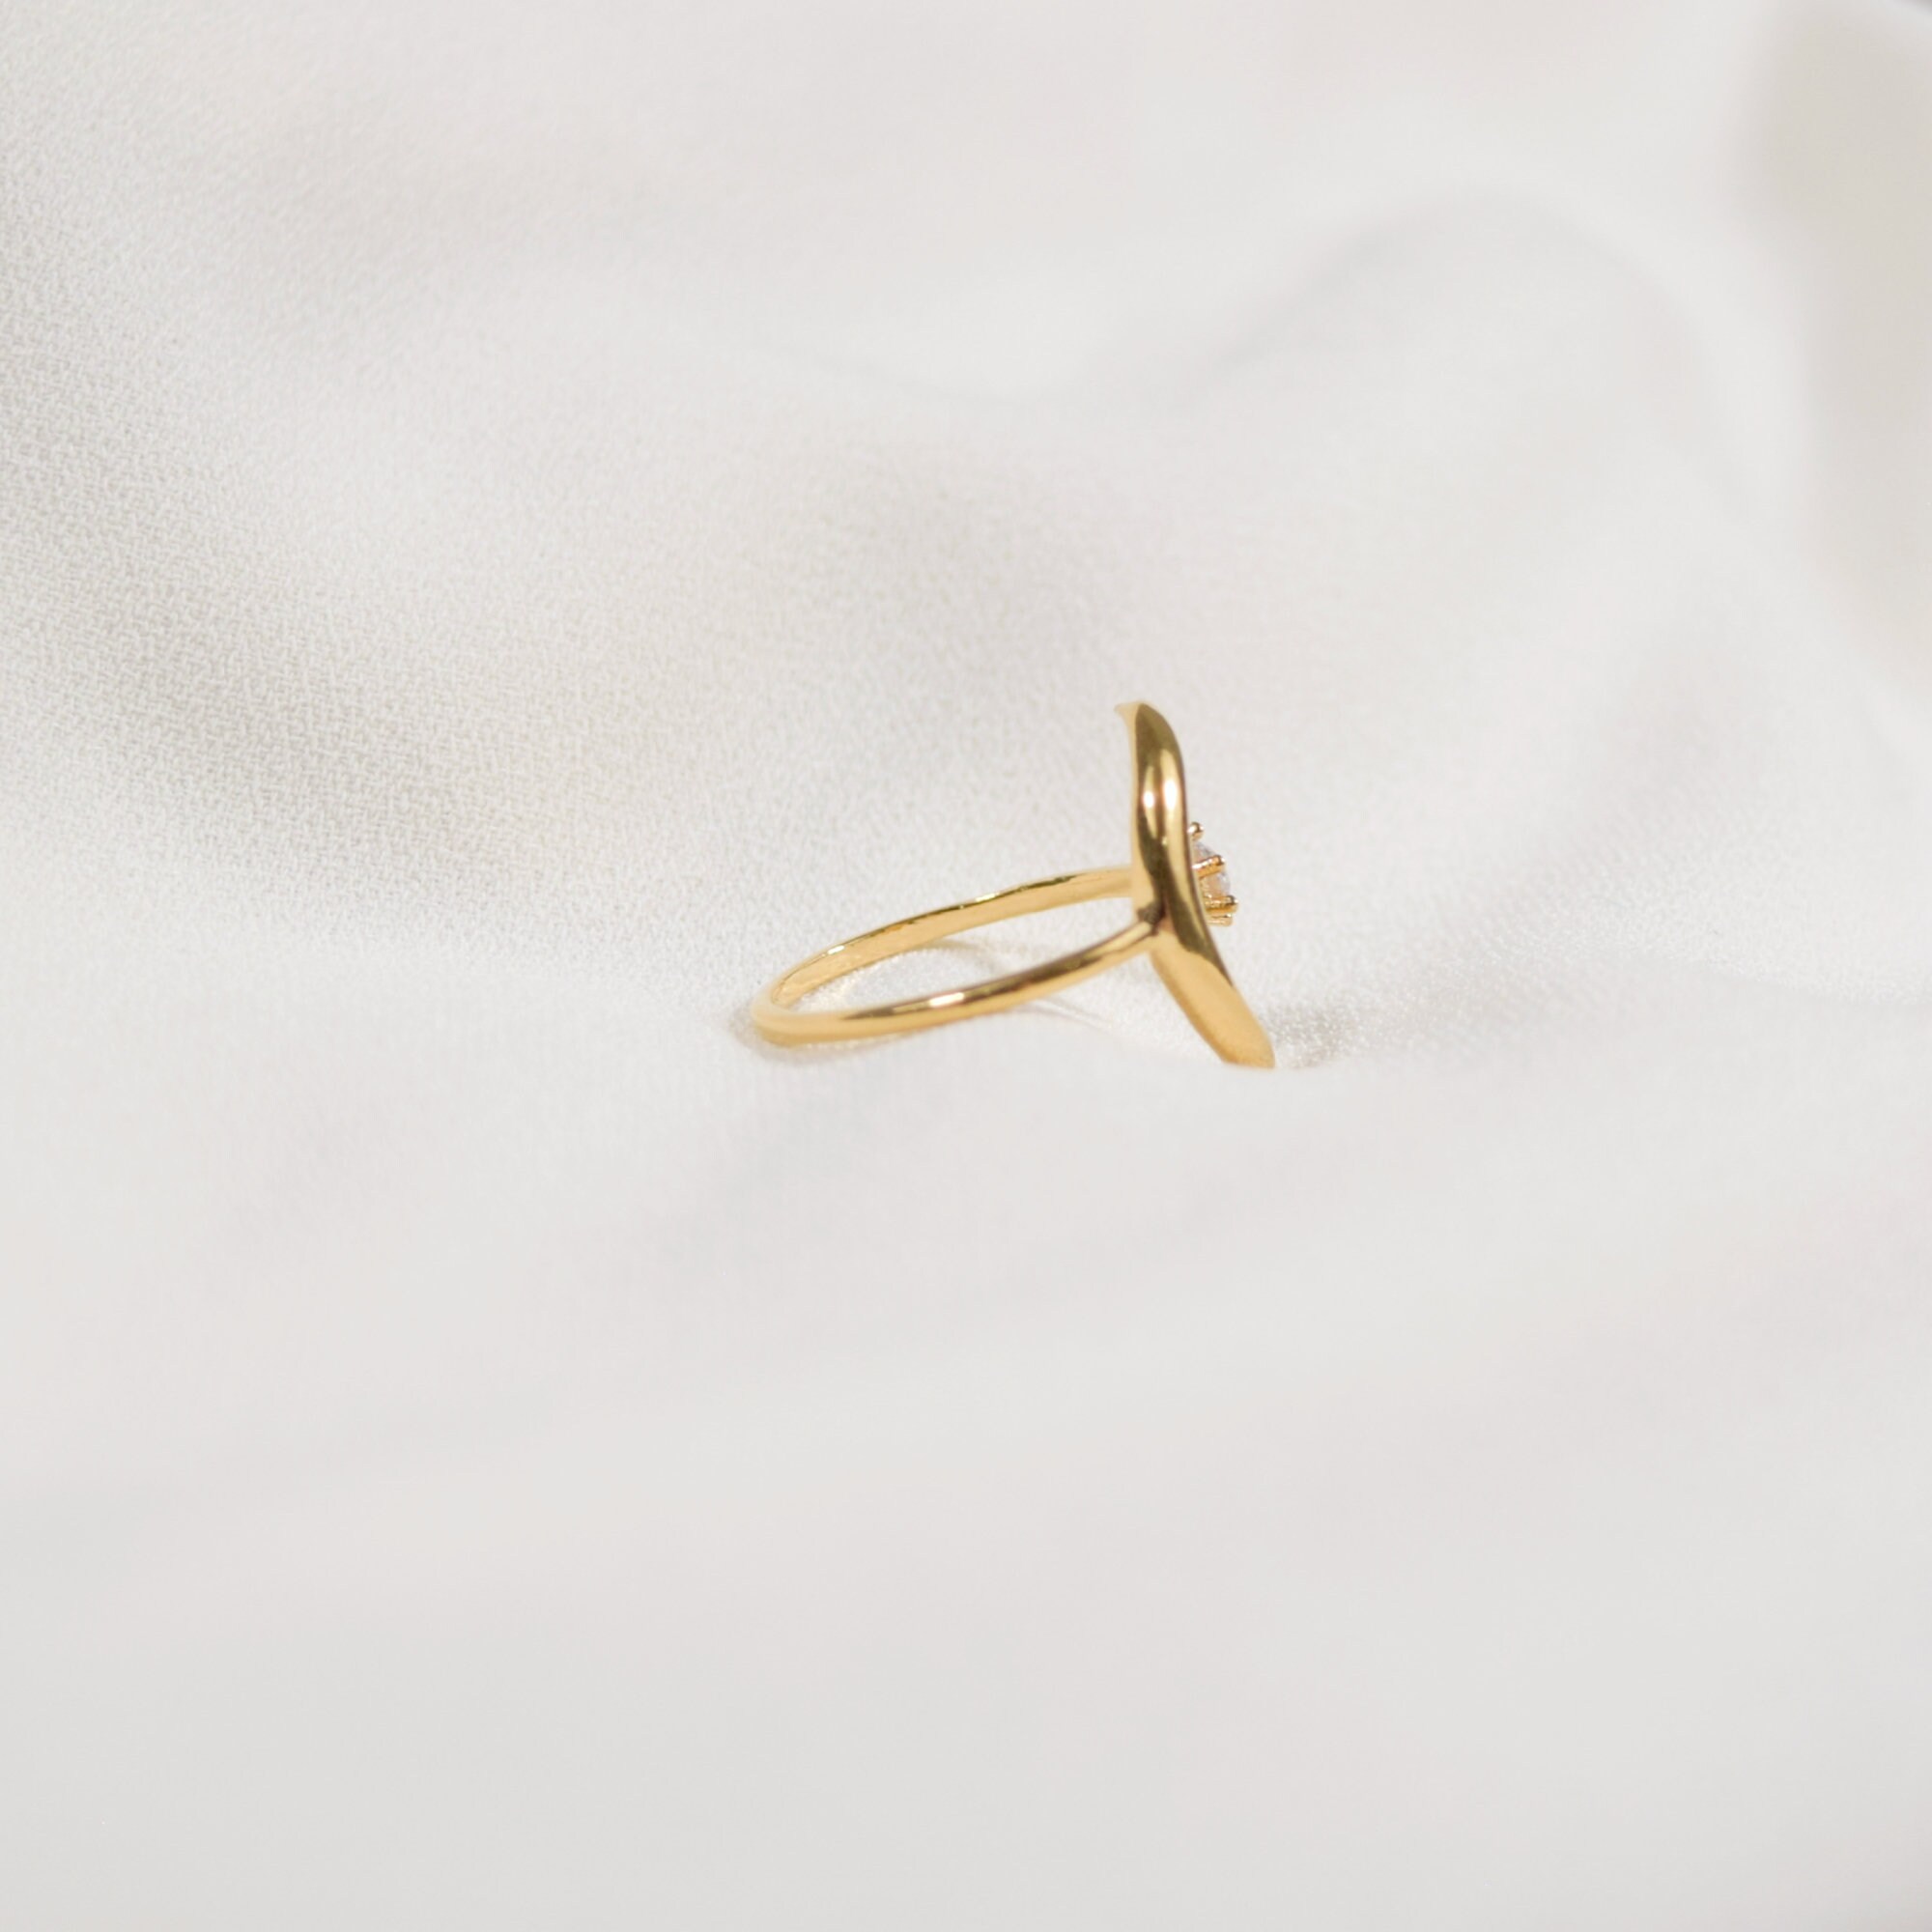 Adjustable Gold Ring Moon Ring Crescent Moon Ring Gold Crescent Moon Ring  Adjustable Ring Gold Celestial Ring Gold Ring Adjustable Pyrite — Dynamo